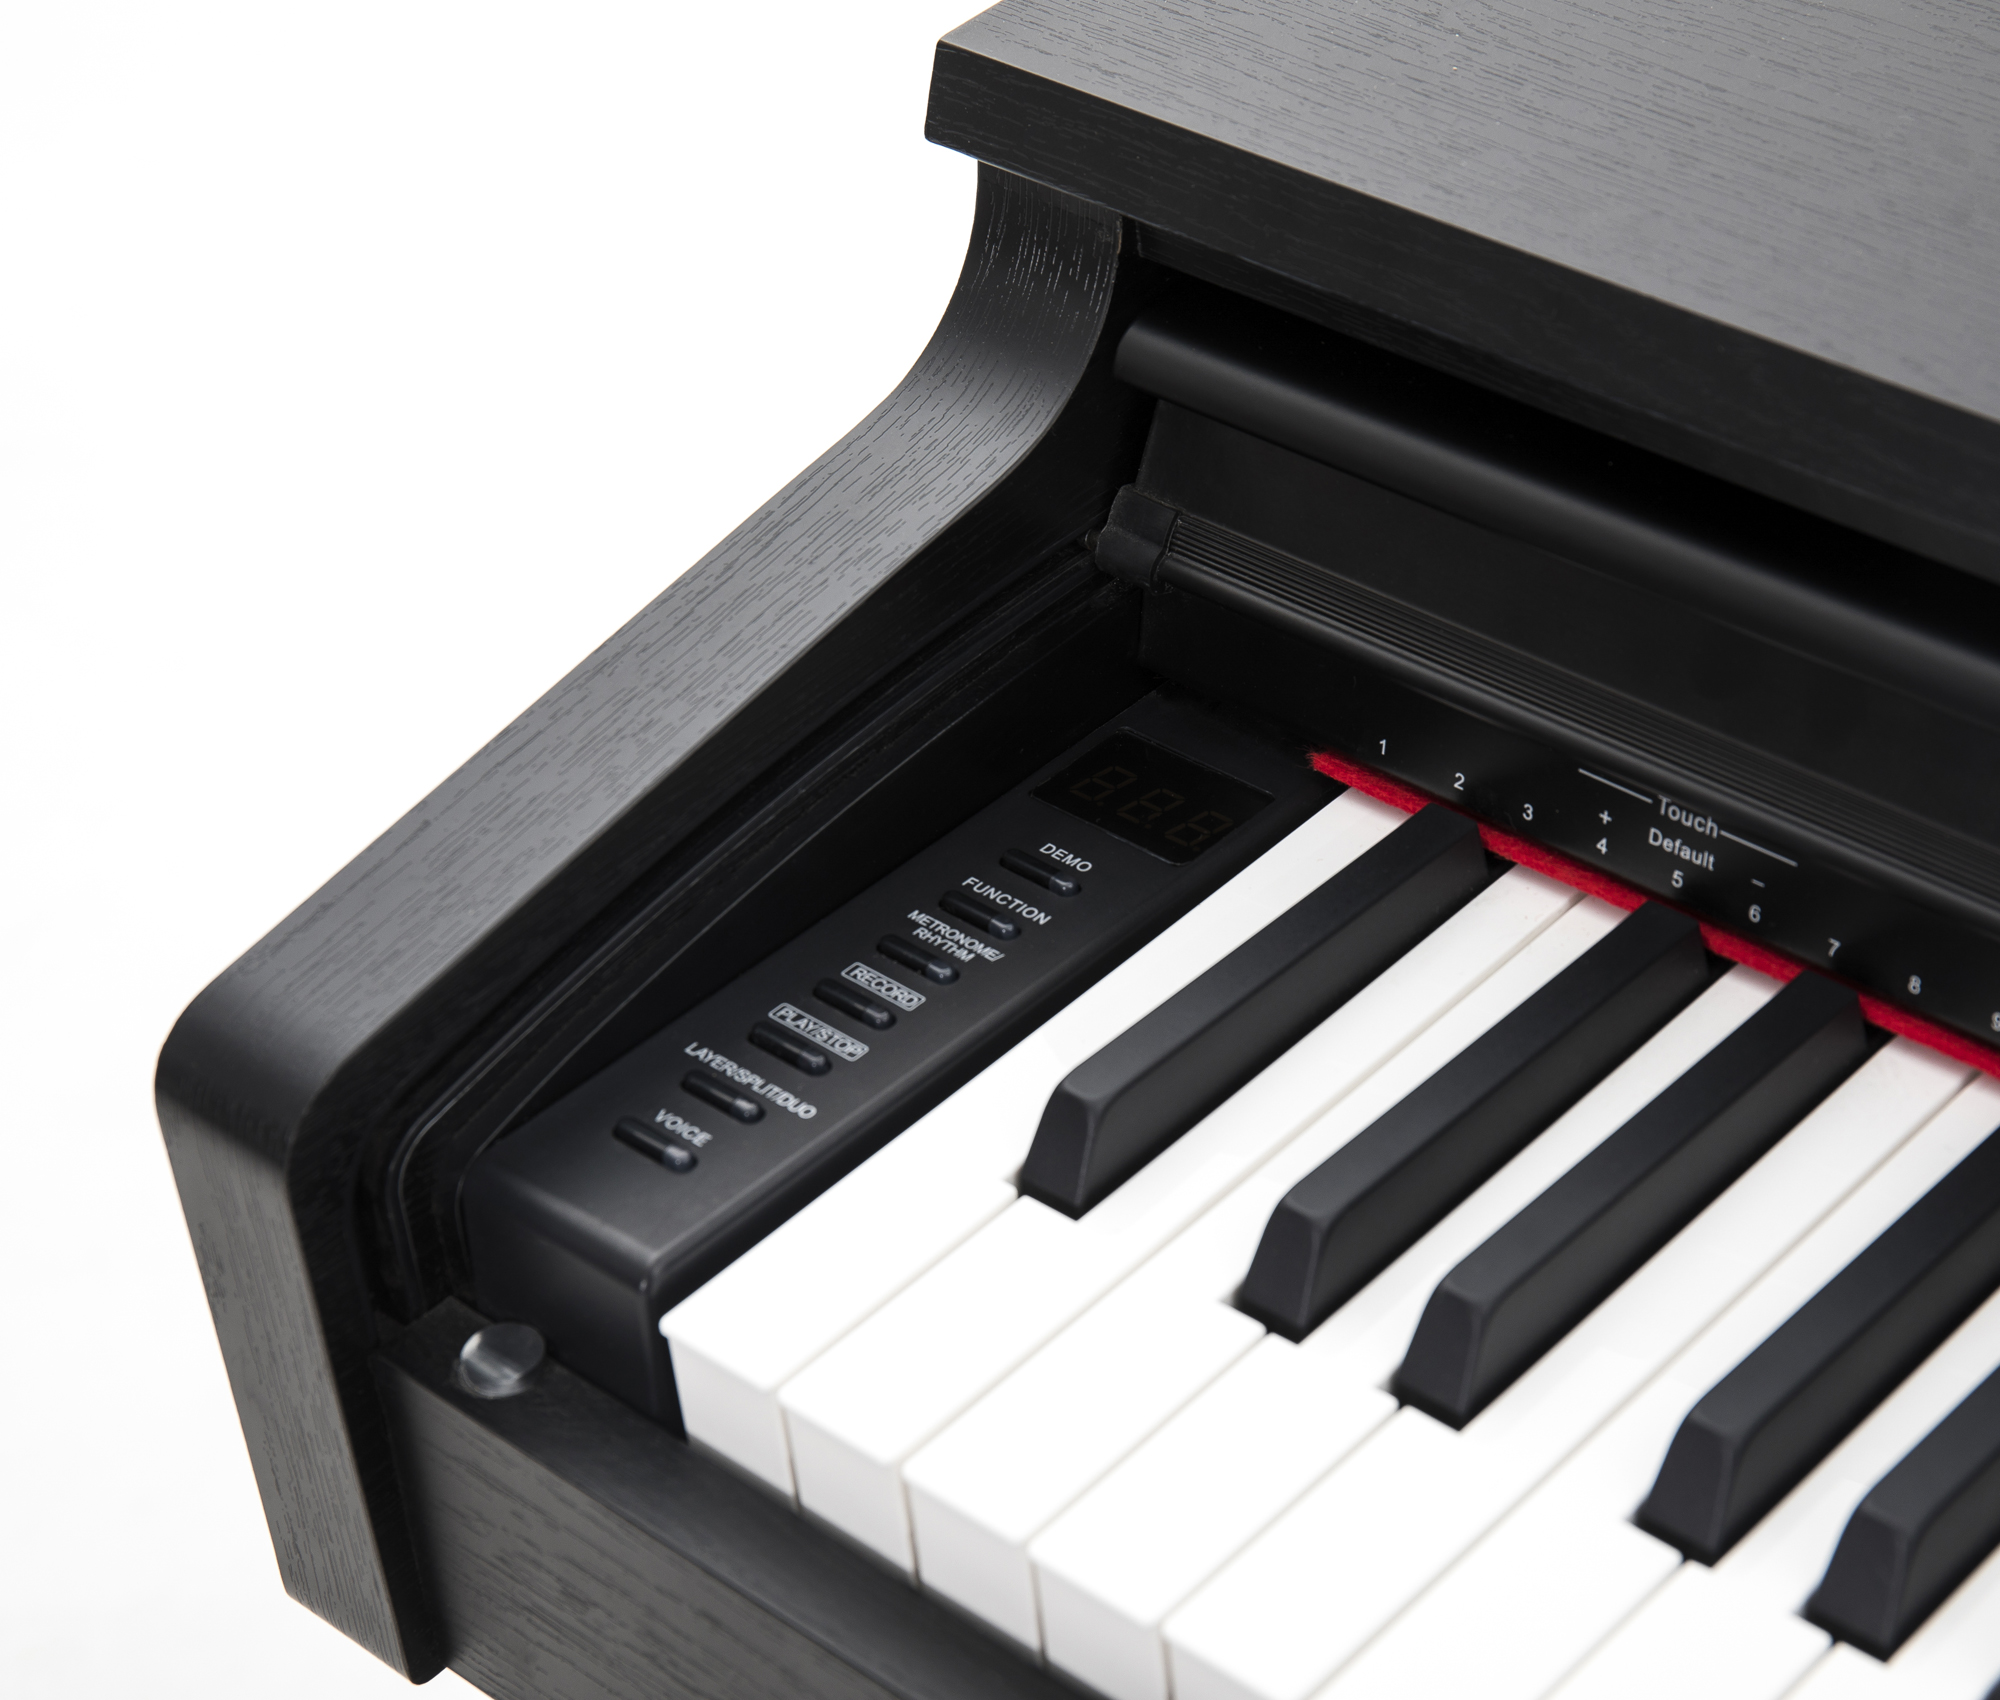 DK-390: Upright Digital Piano Professional, 88 Keyboard, 192 Polyphony, Factory Supply